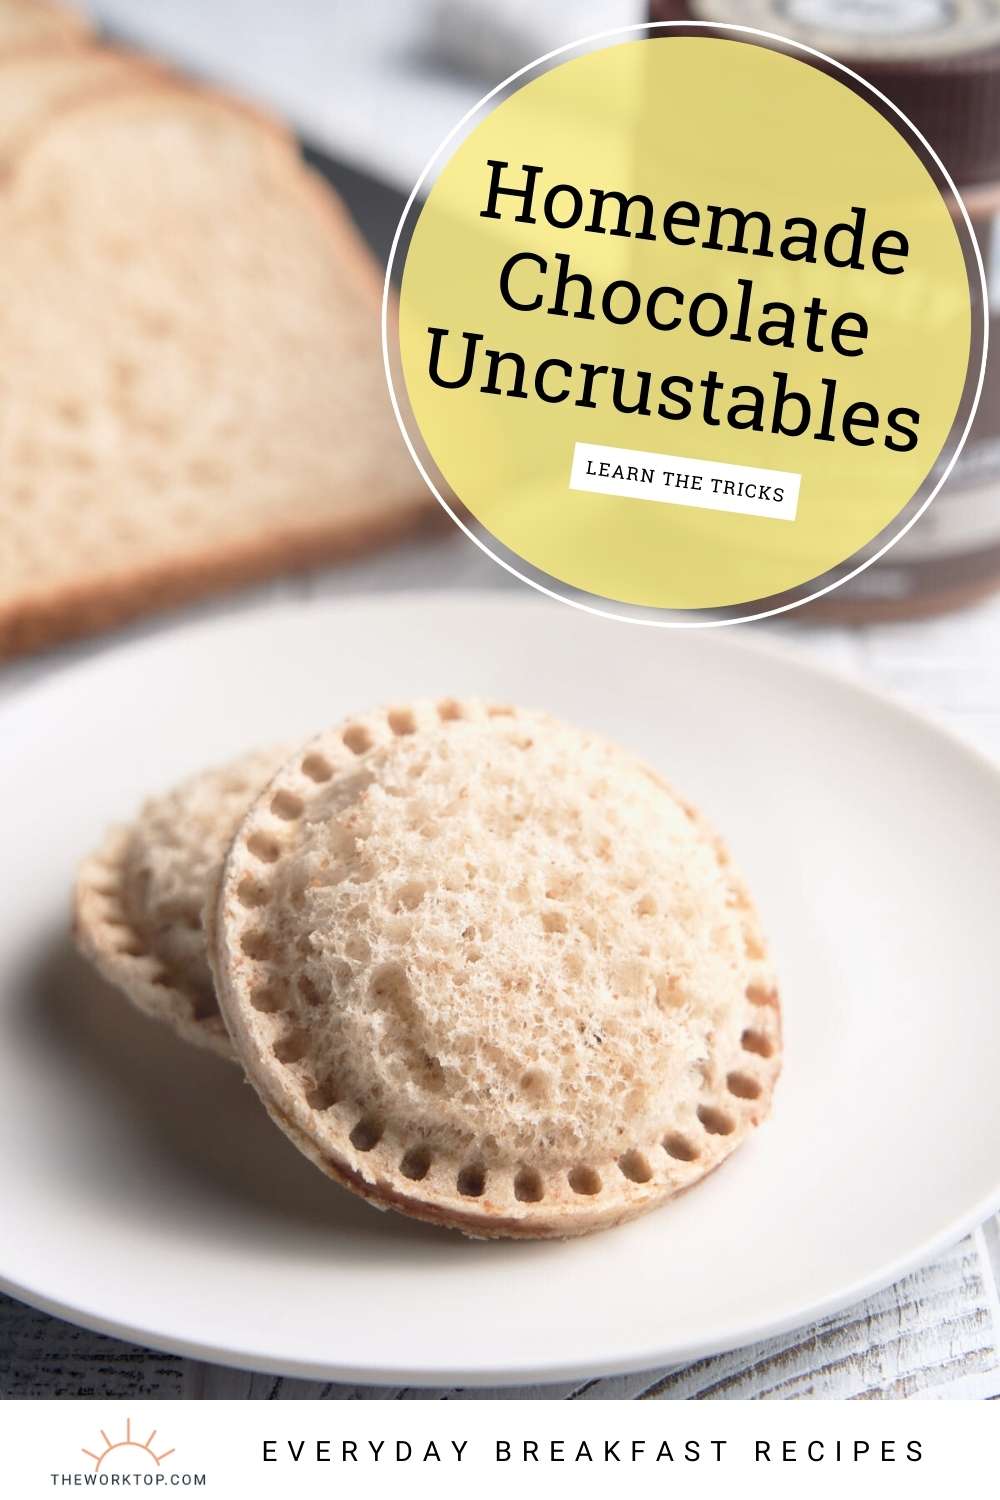 Homemade Chocolate Uncrustables -  Text Learn the Tricks